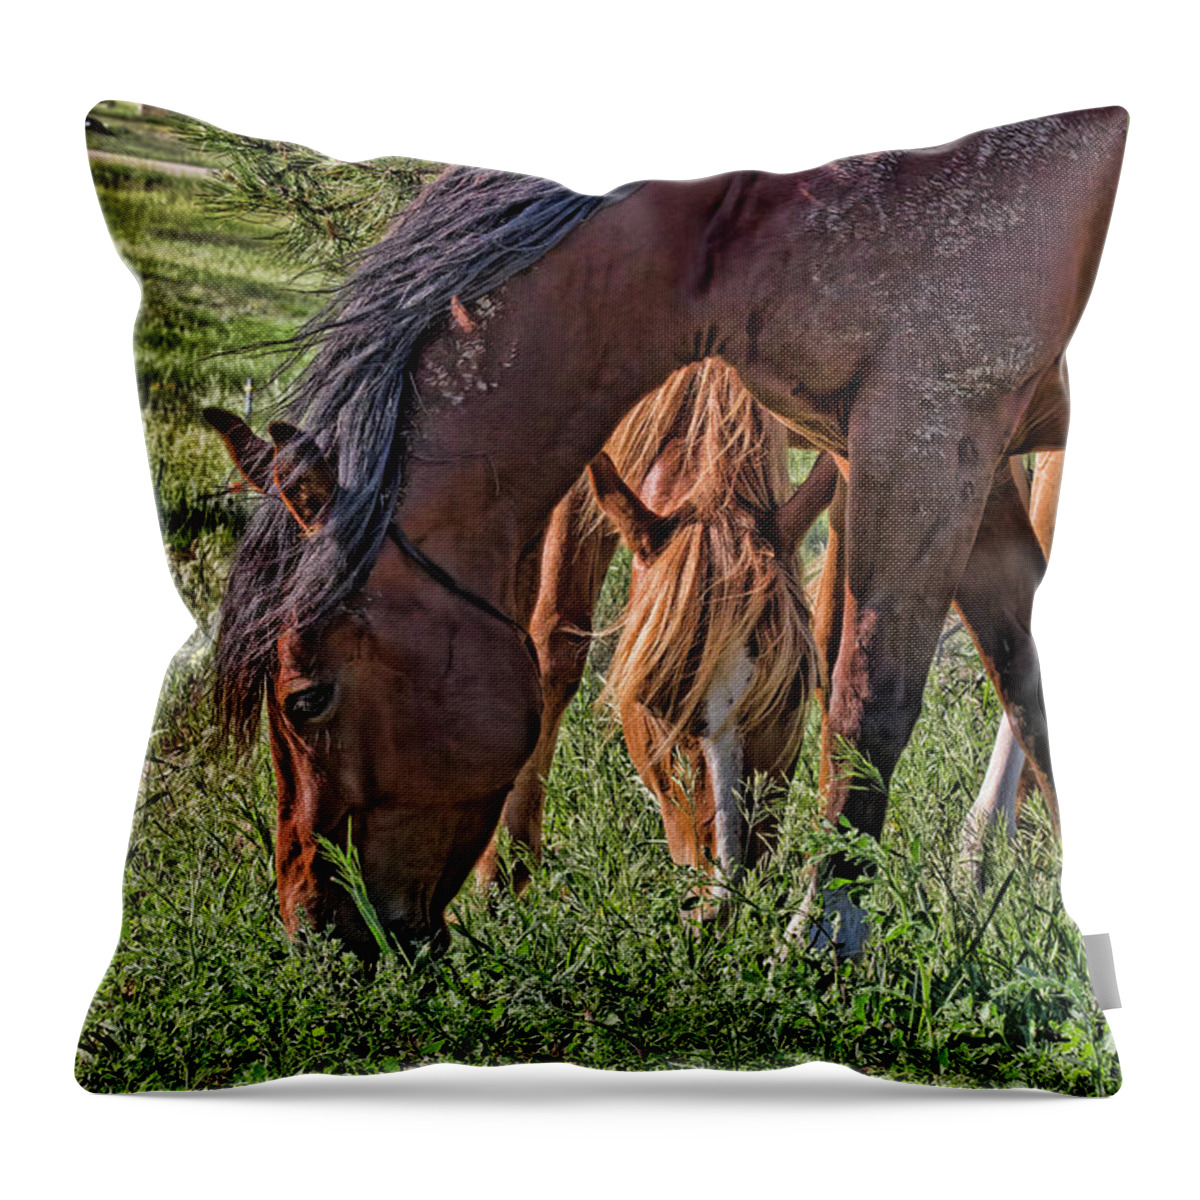 Horses Throw Pillow featuring the photograph Green Grass and Mud by Alana Thrower